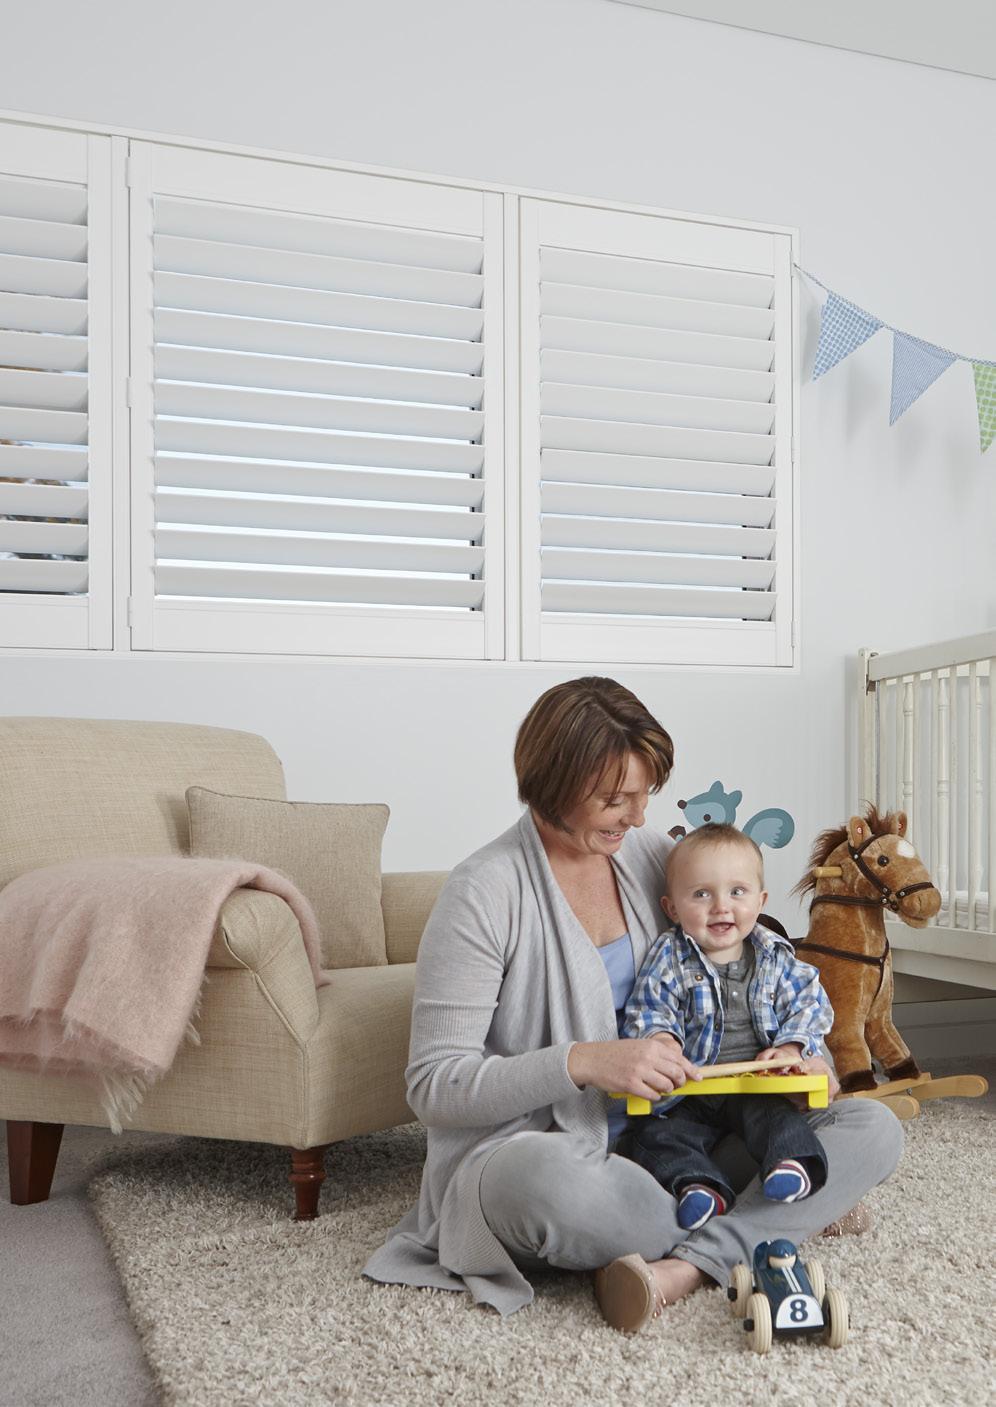 Luxaflex PolySatin Shutters PolySatin Shutters are made from a non-toxic polyresin compound,